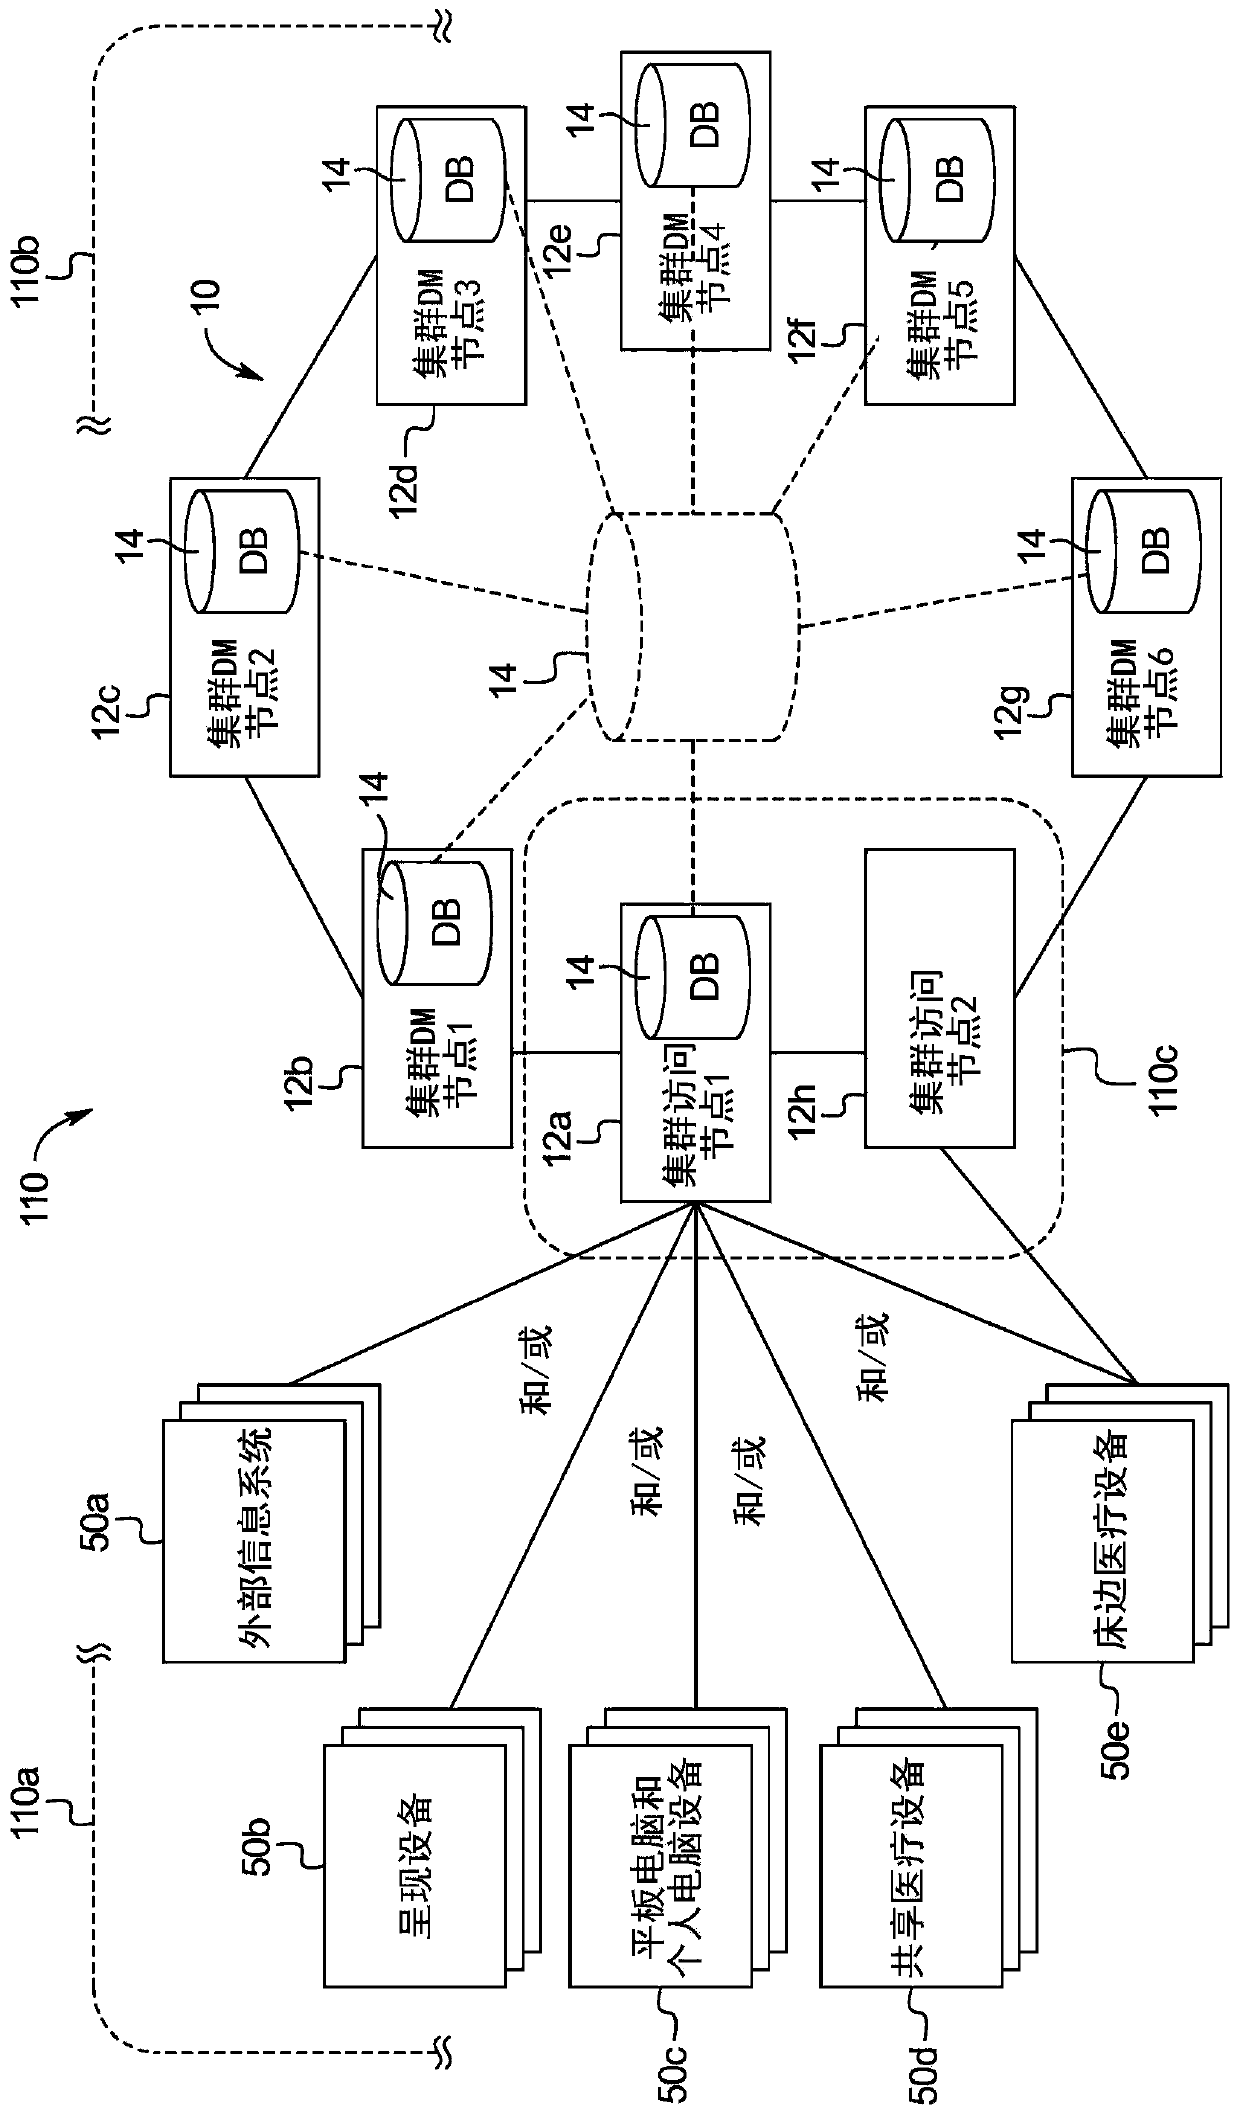 Medical device system including information technology infrastructure having secure cluster domain supporting external domain